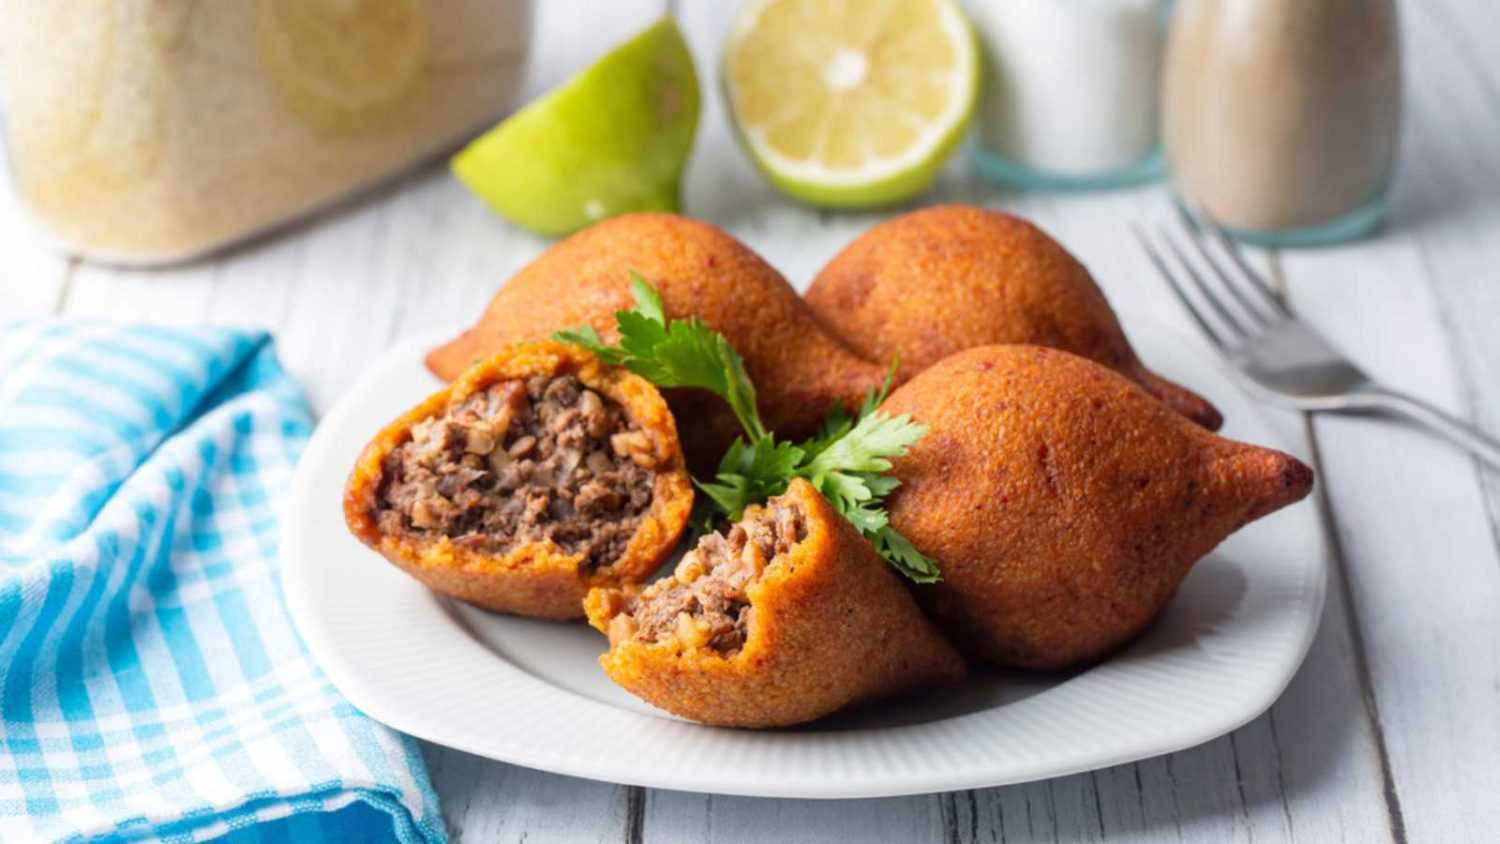 <p><span>If you want something authentic, you can't go wrong with Kibbeh, the national dish of Lebanon. These torpedo-shaped, fried croquettes are packed with bulgur, minced meat, onions, and sauteed <a href="https://www.corriecooks.com/pine-nut-substitute/" rel="noopener">pine nuts</a>. </span></p> <p><span>If you're in the mood for something light, look no further than Tabbouleh. A salad made of mint, parsley, fresh tomatoes, olives, onions, and bulgur or couscous, this colorful staple is excellent as a side or a main dish. </span></p> <p><span>A crunchy, creamy dessert known as Kunāfah makes a beautiful finish for a traditional Lebanese meal, especially if you like the flavor of citrus. </span></p>